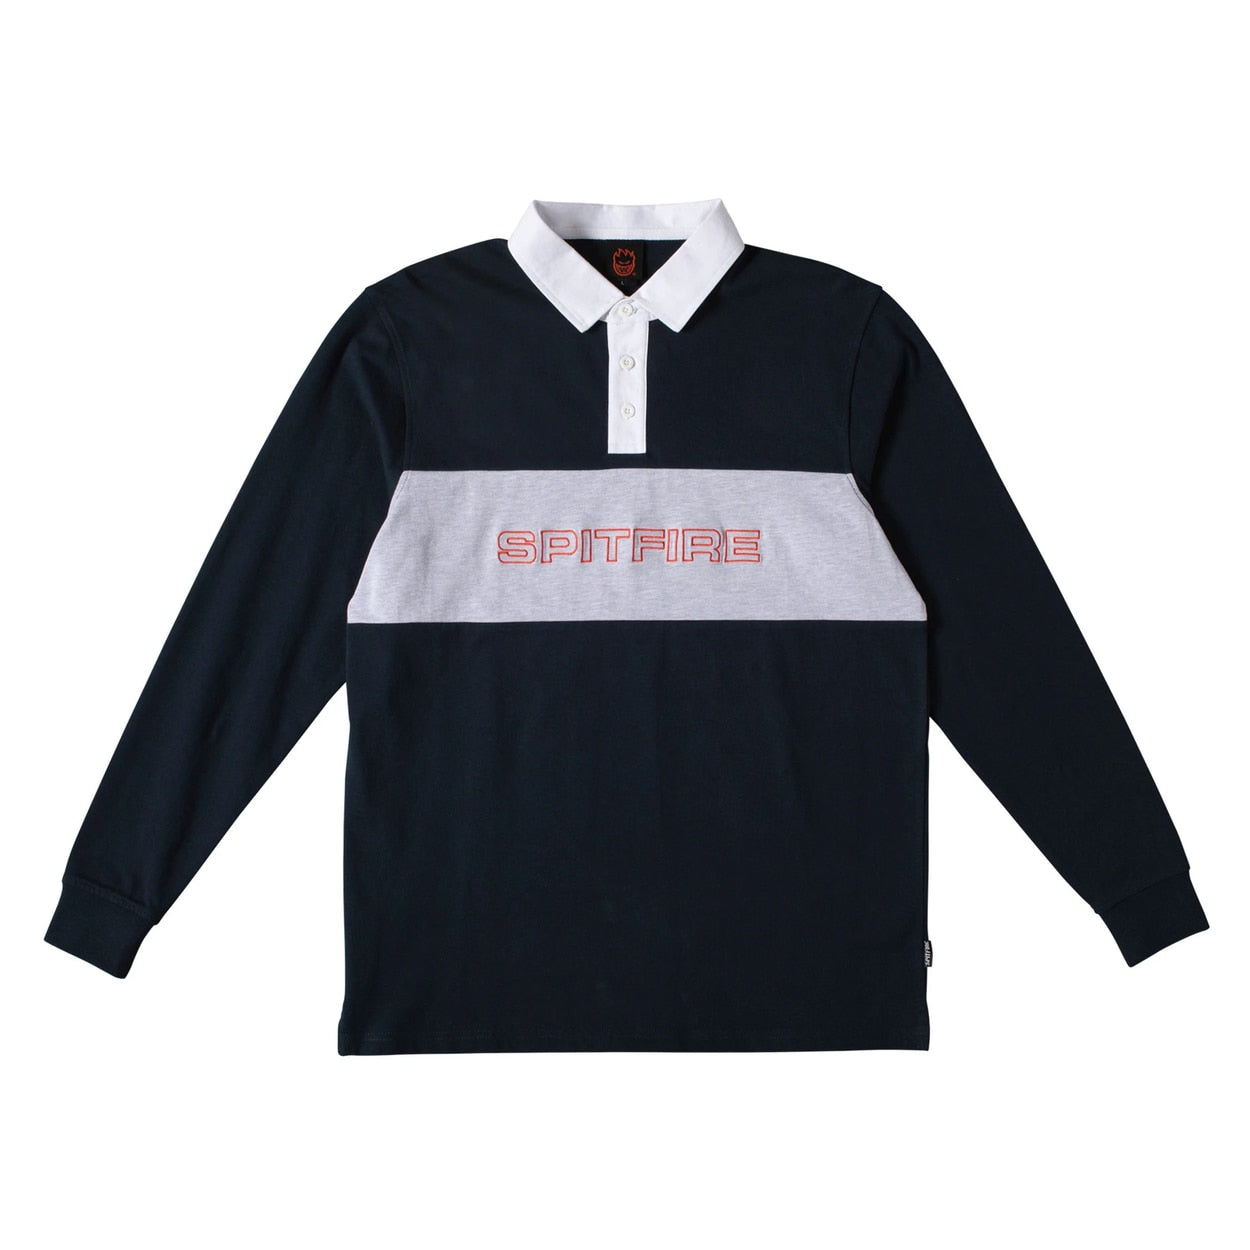 Spitfire Geary Rugby Long Sleeve Shirt - Navy/Grey Heather